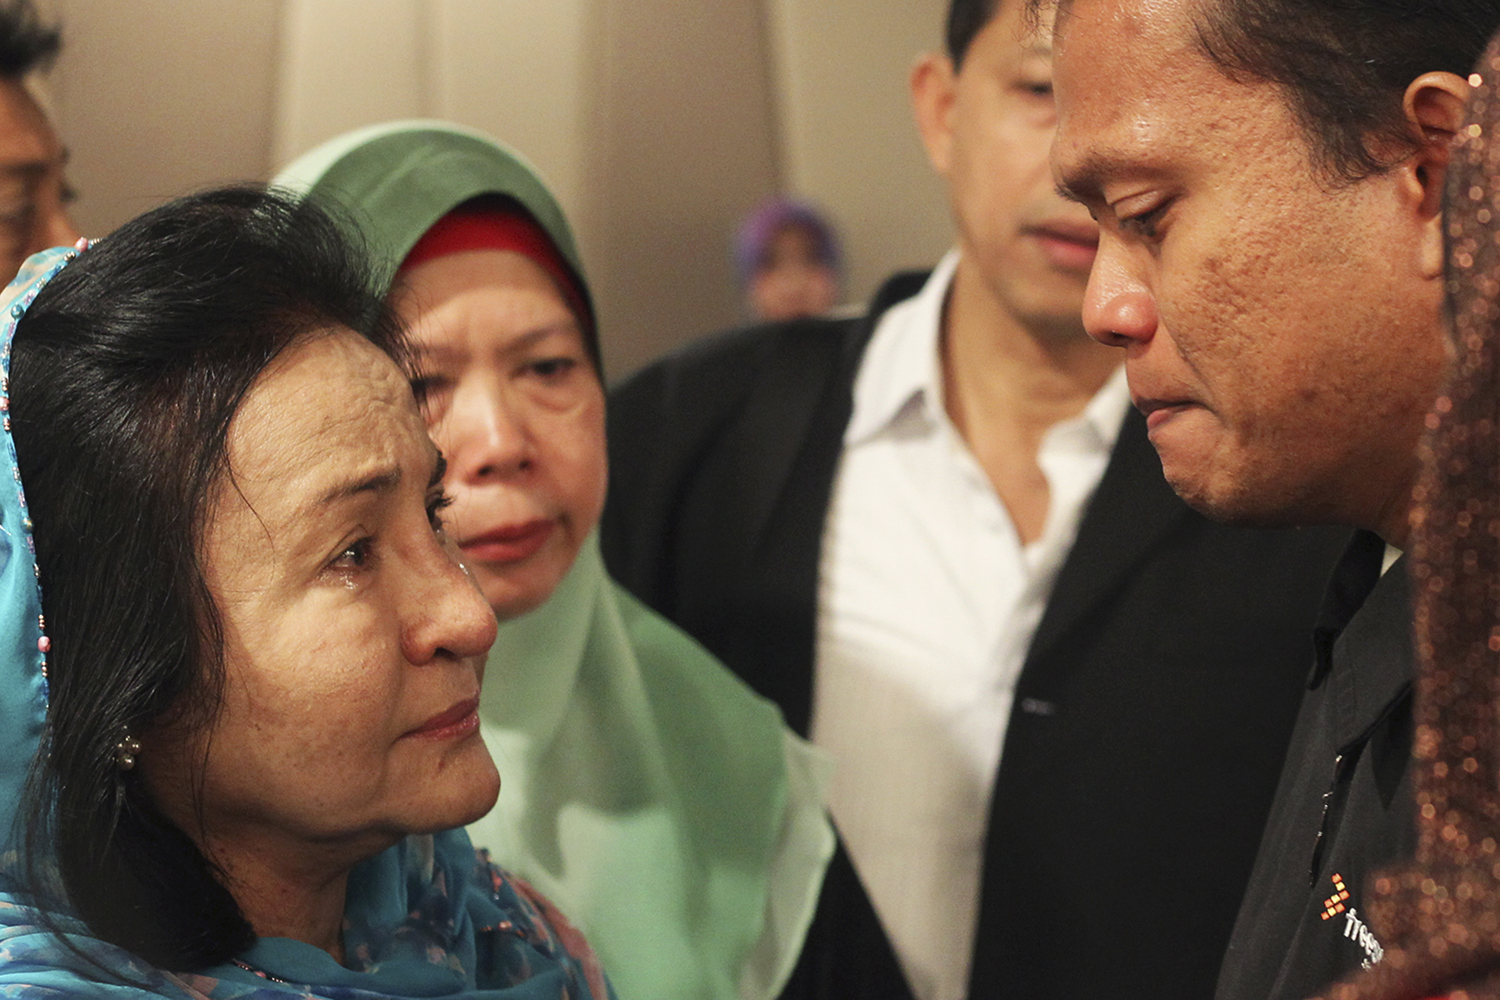 Rosmah Mansor, left, wife of Malaysian Prime Minister Najib Razak, cries with family members of passengers on the missing Malaysia Airlines flight MH370, at a hotel in Putrajaya March 9, 2014. (Zulfadli Zaki—Reuters)